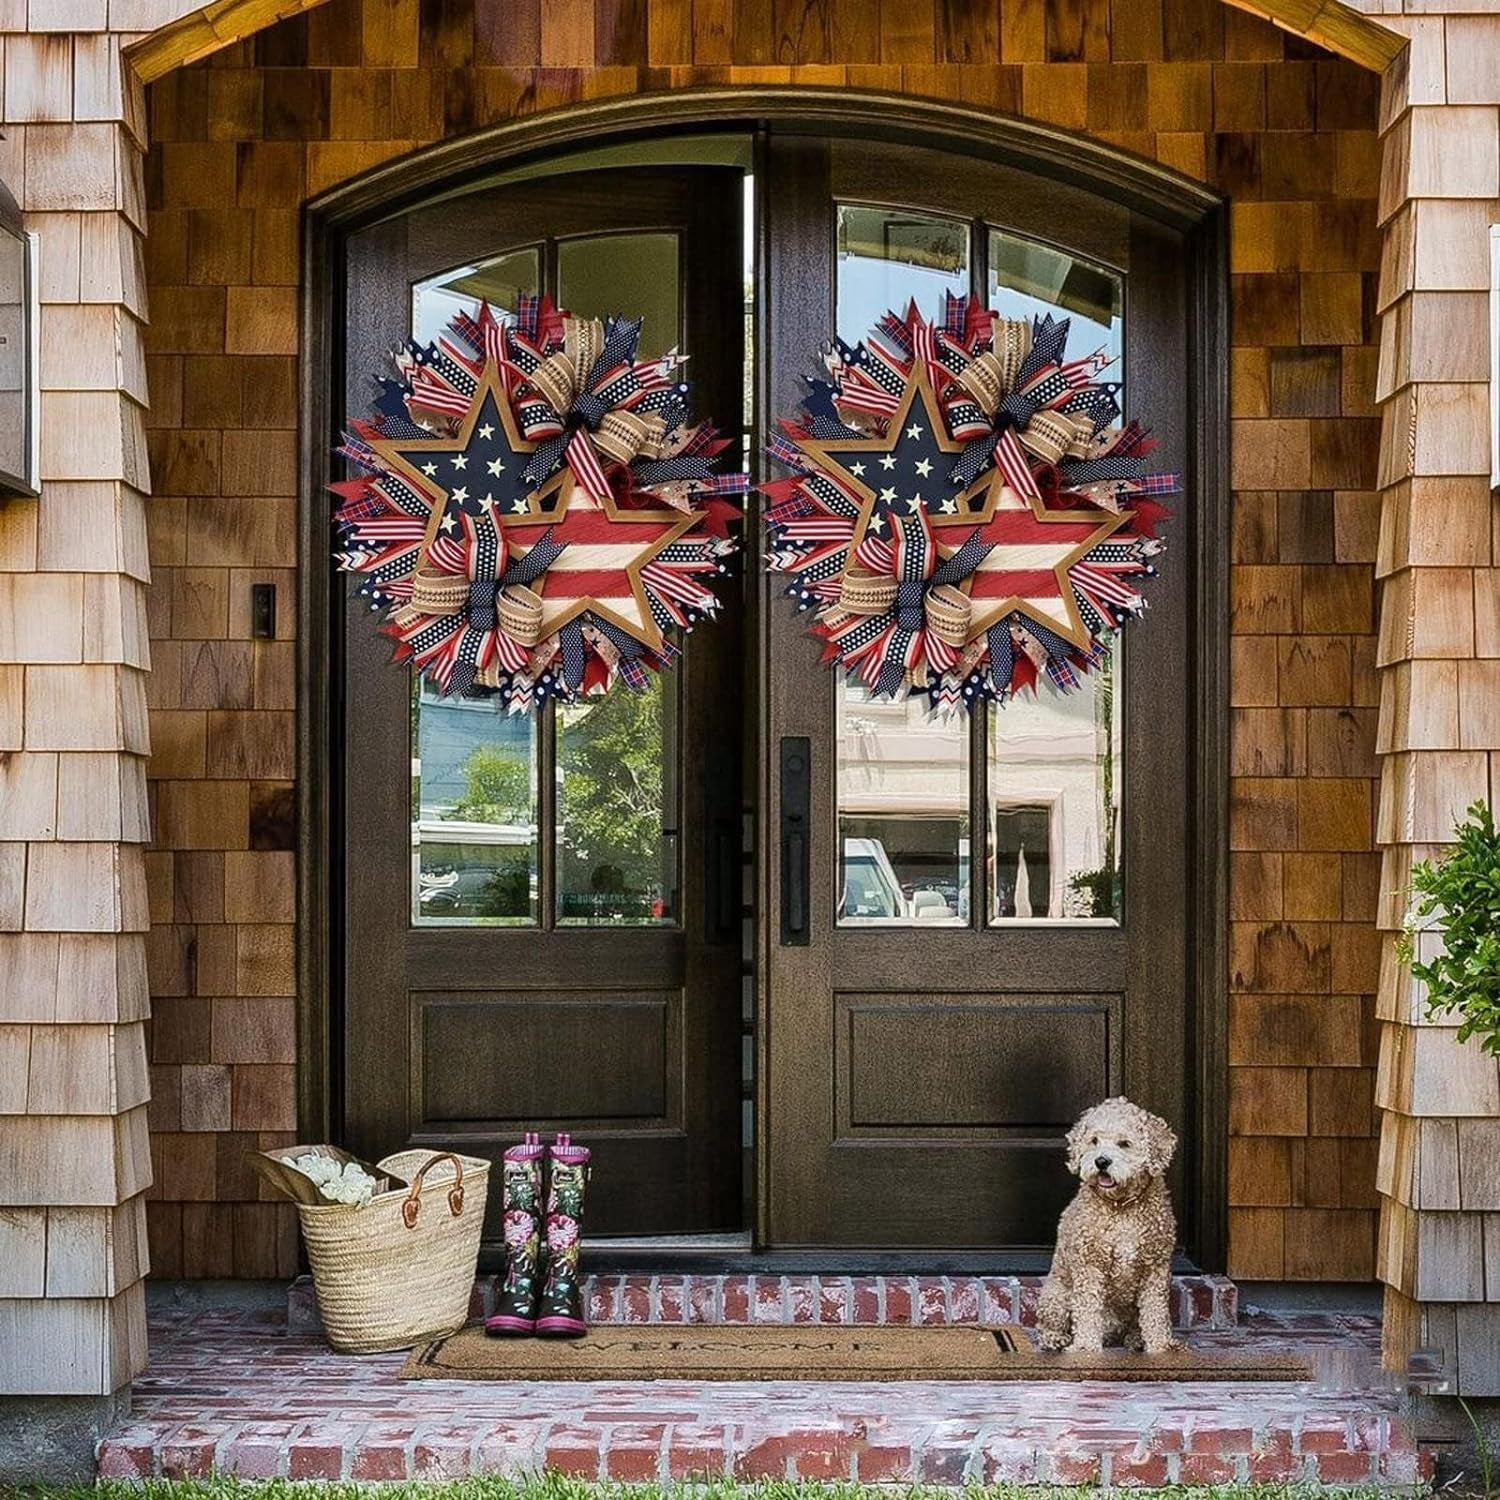 4Th of July Patriotic Wreath, Red White and Blue Flag Wreath,Memorial Day Pride Garland for Front Door, Independence Swag Indoor Outdoor Wall Holiday Decor Home